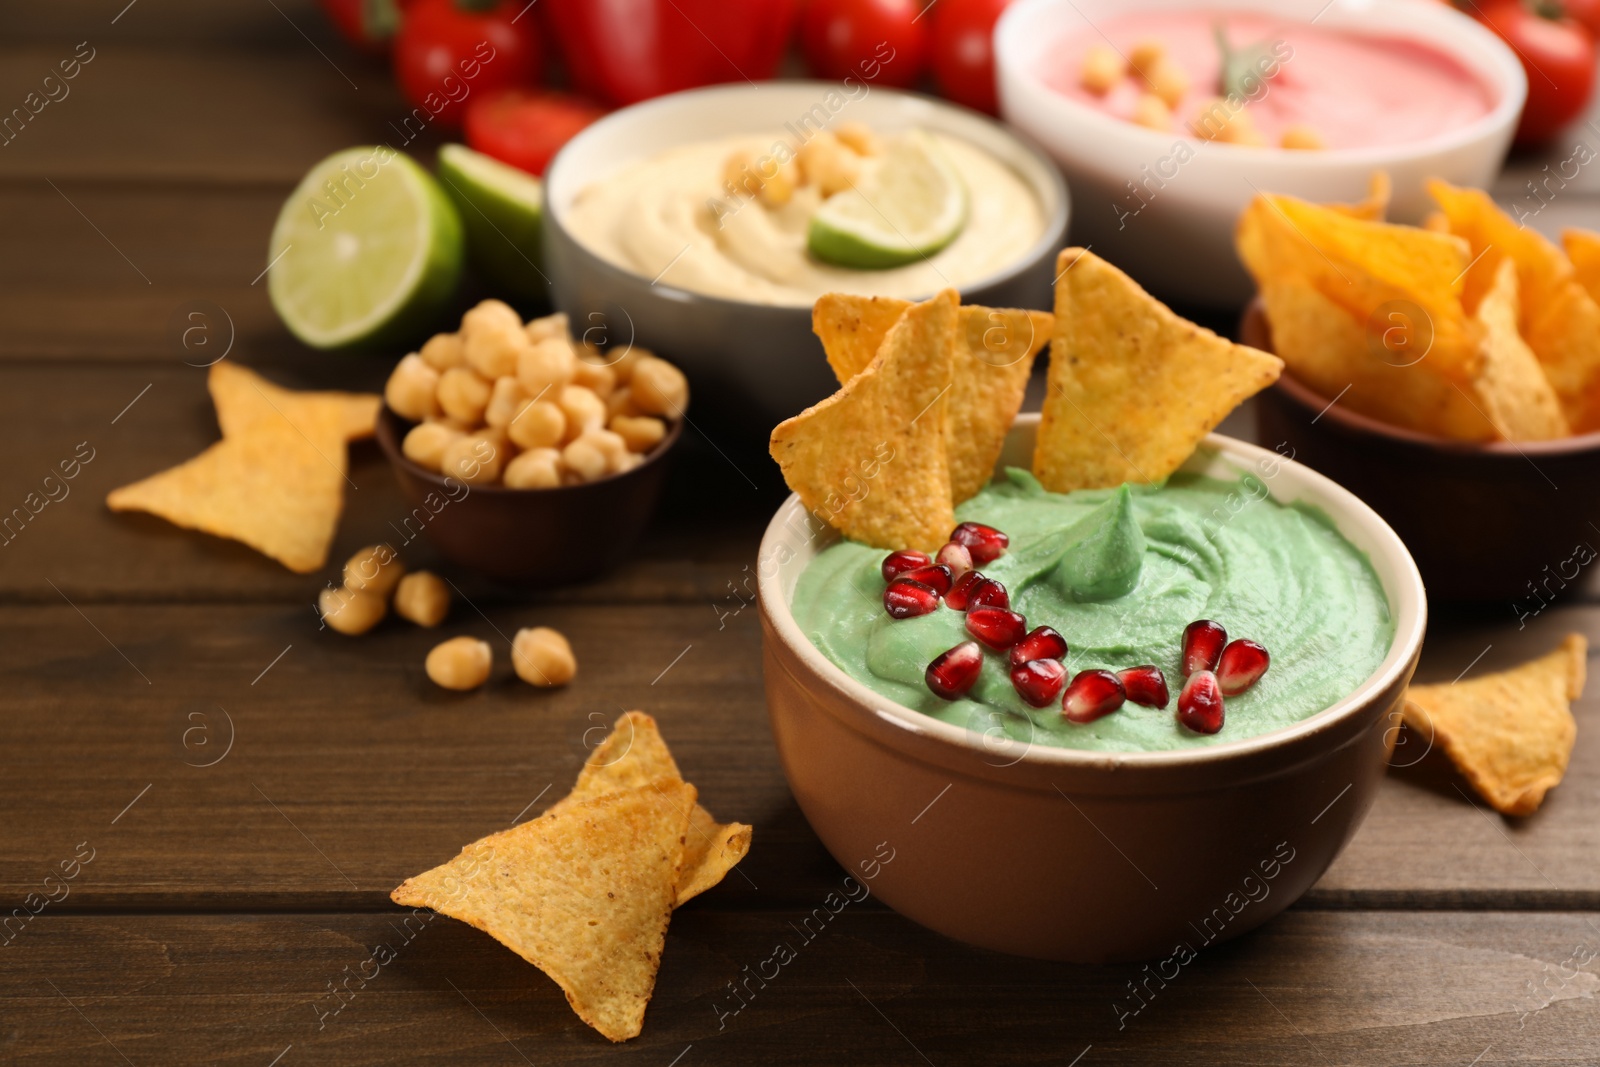 Photo of Different kinds of tasty hummus, nachos and ingredients on wooden table